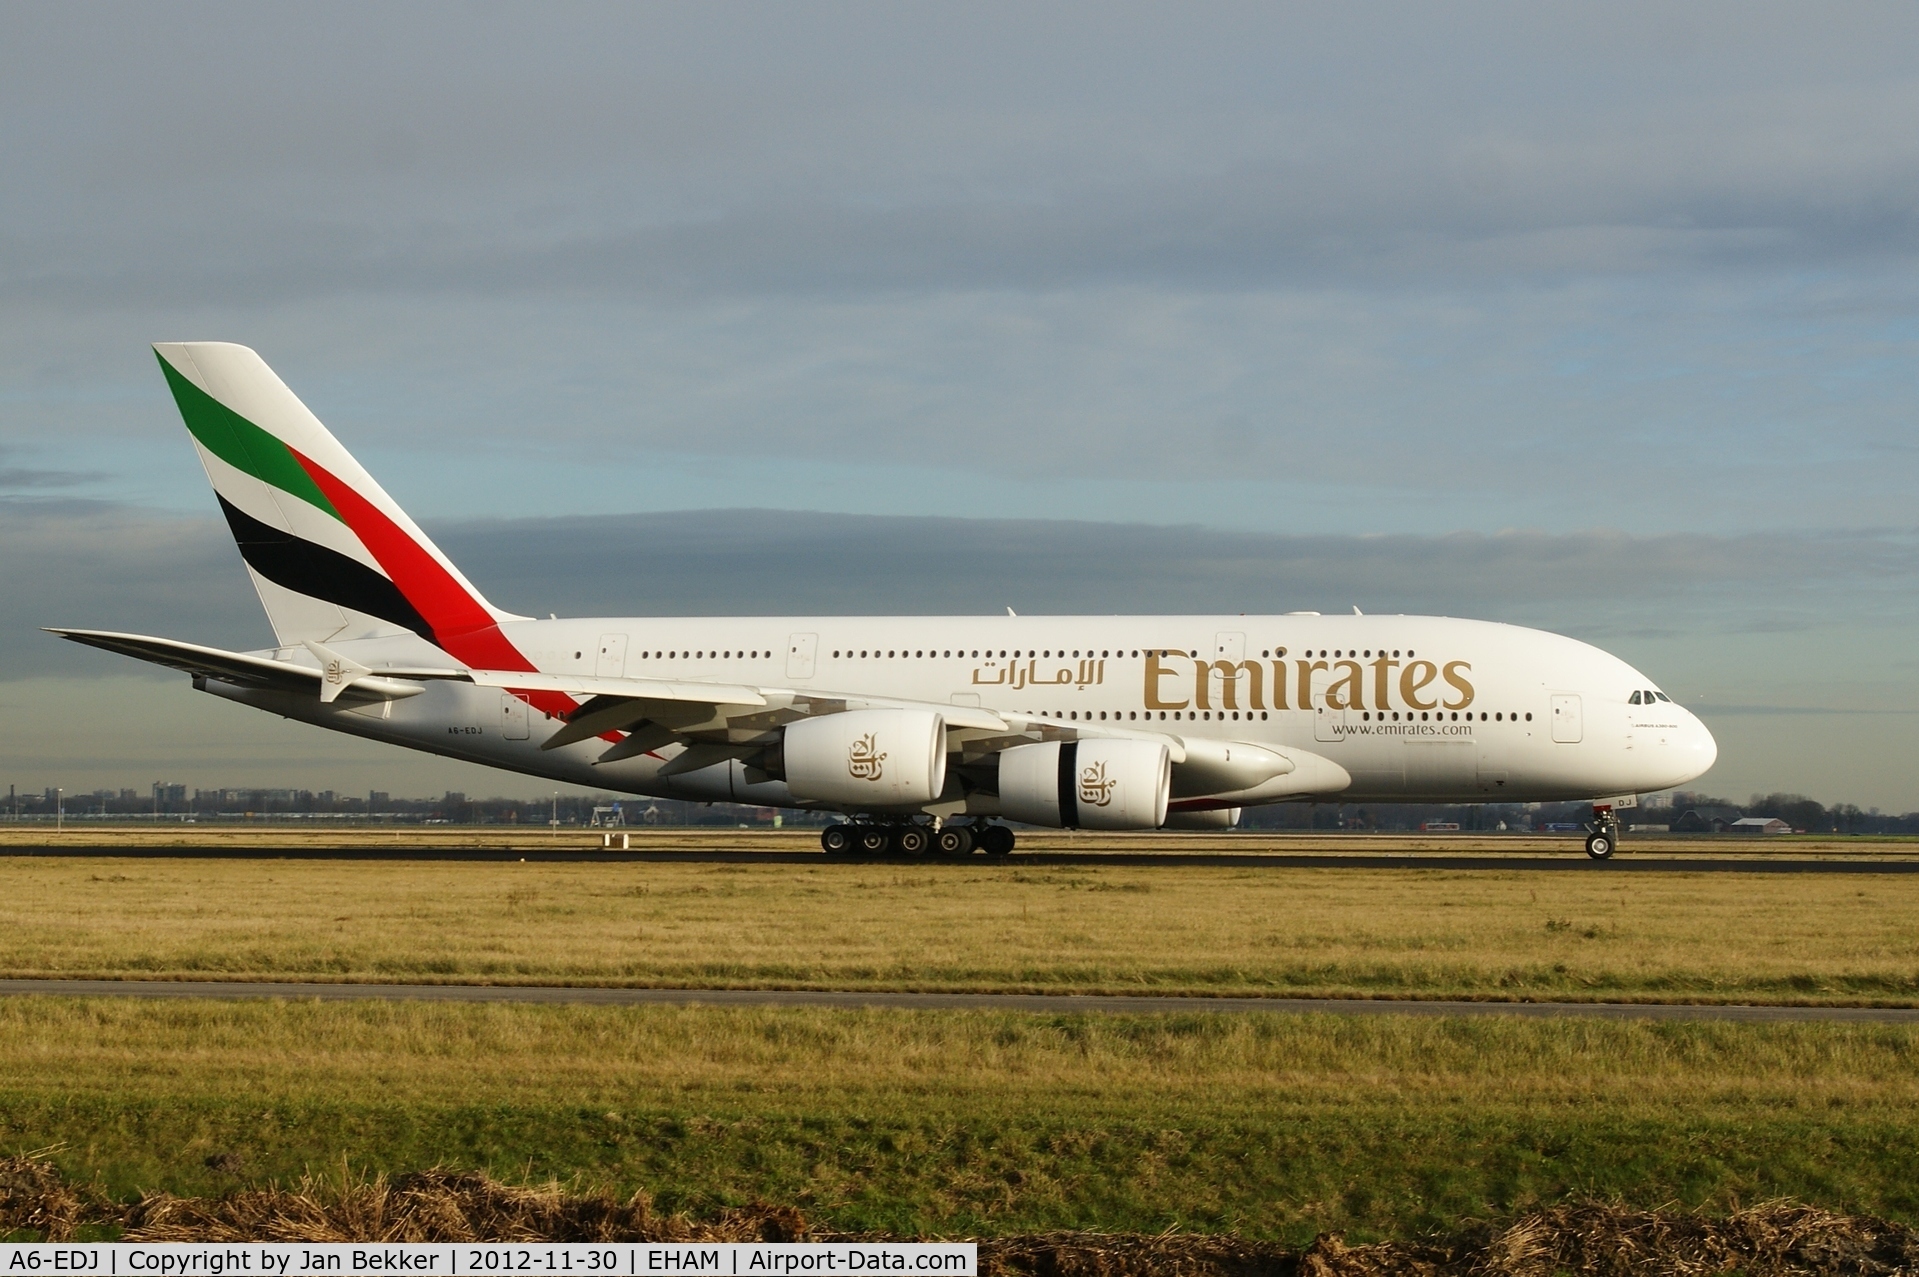 A6-EDJ, 2006 Airbus A380-861 C/N 009, Just after landing on the 